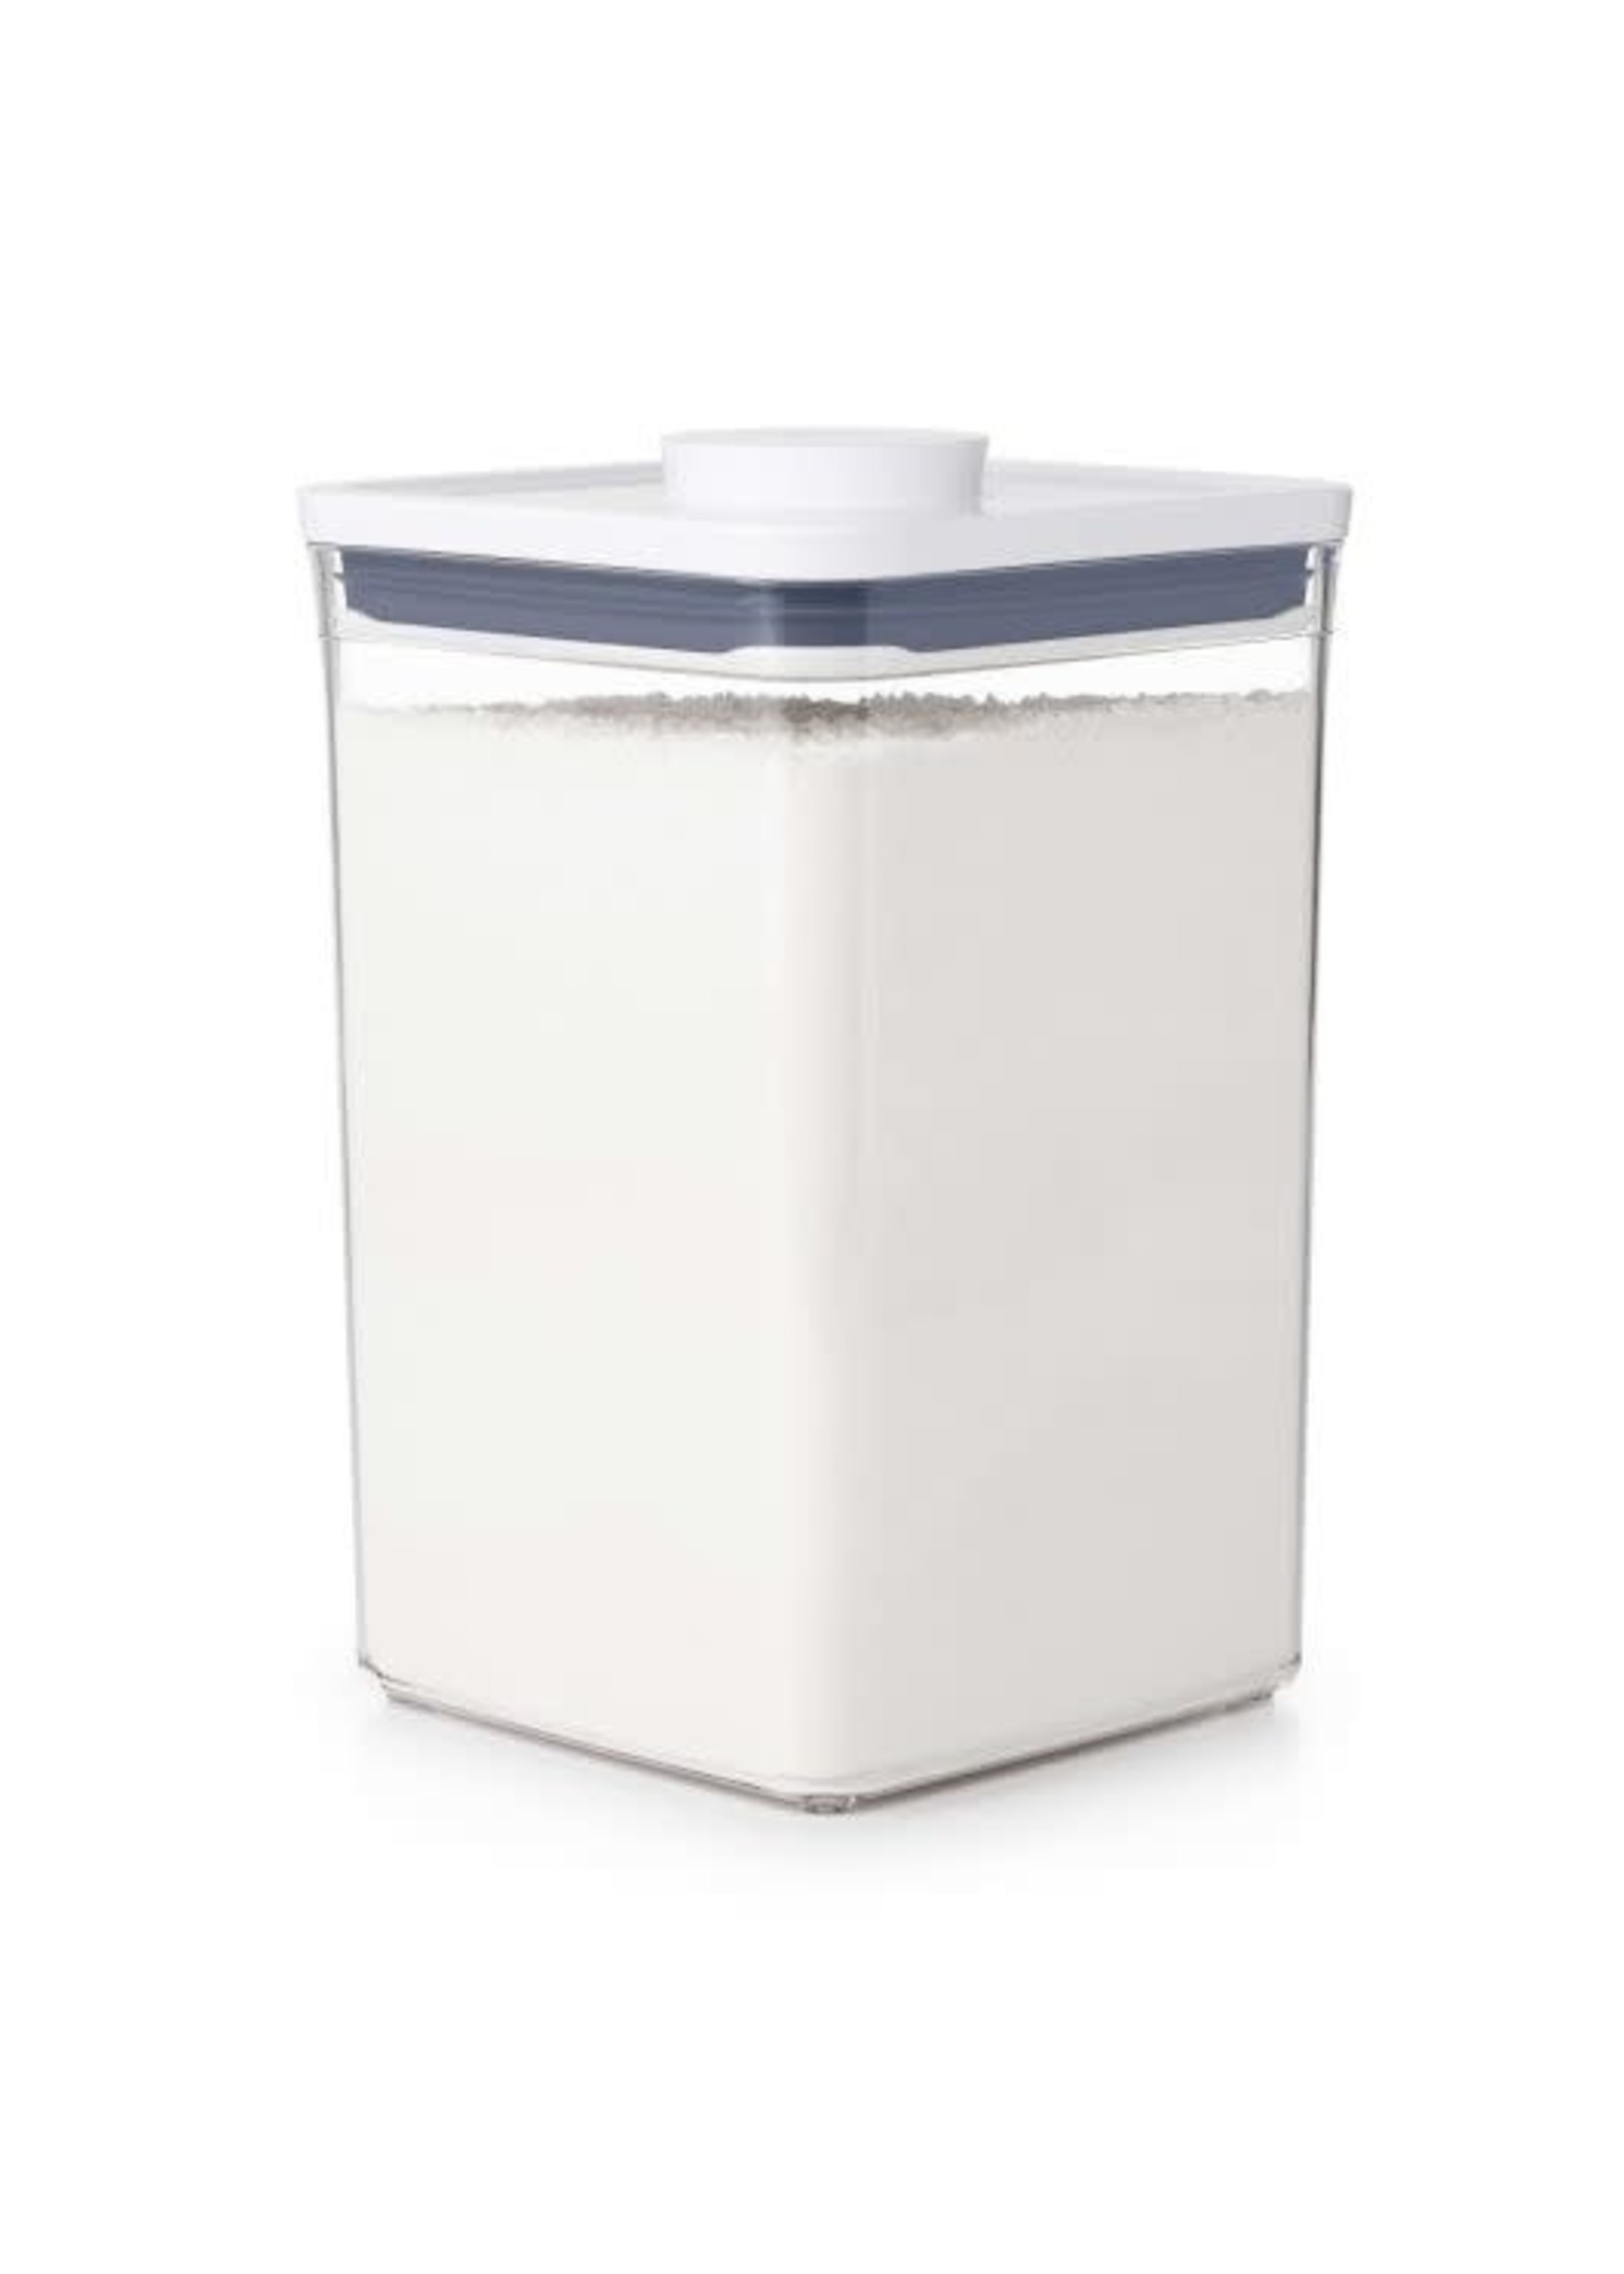 inch at retfærdiggøre Plantation OXO Oxo Big Square 4.4 Qt. POP Container - The Kitchen Table